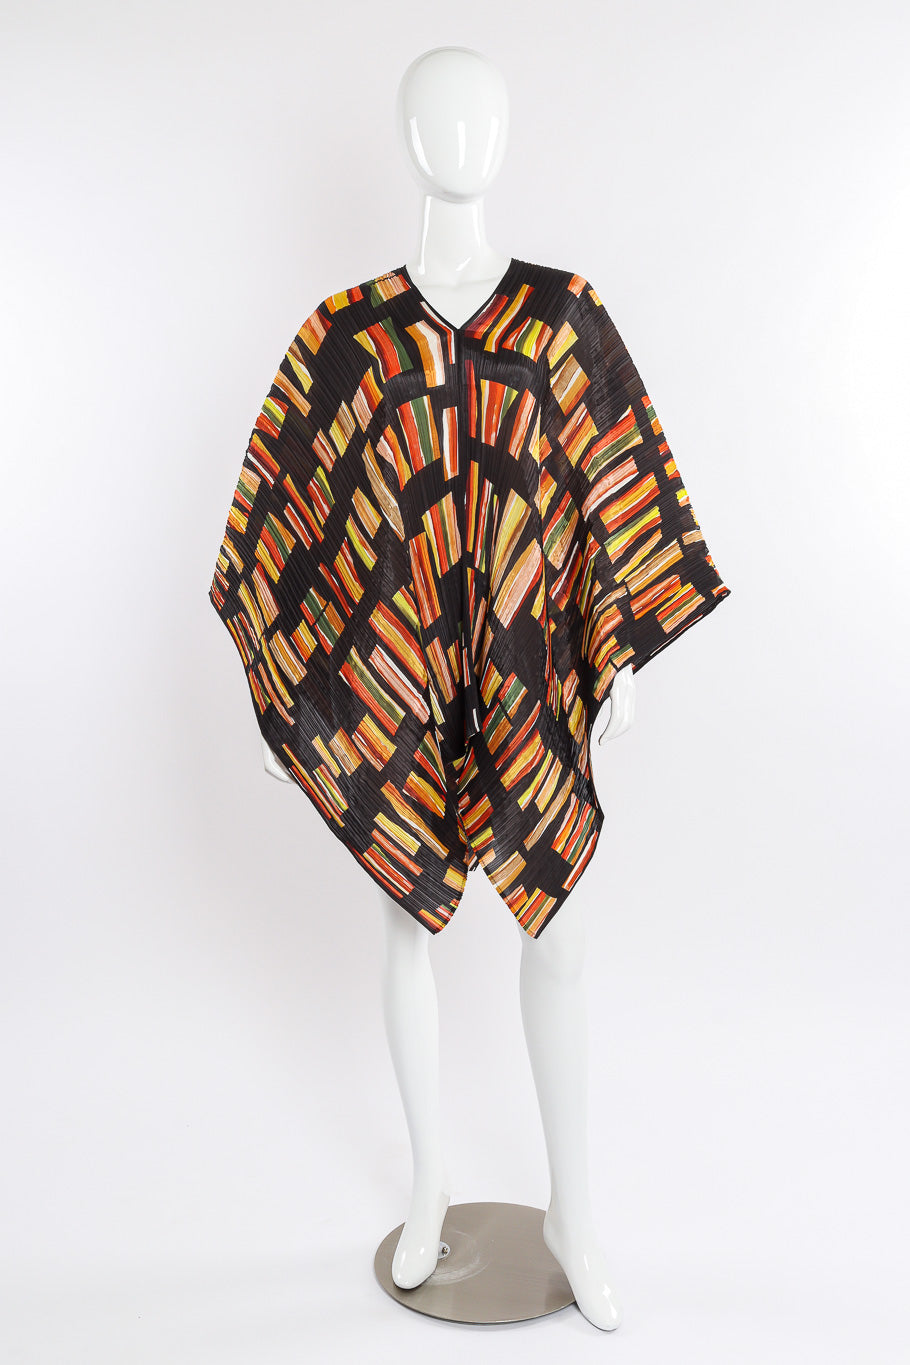 Poncho top by Issey Miyake for Pleats Please on mannequin far length @recessla